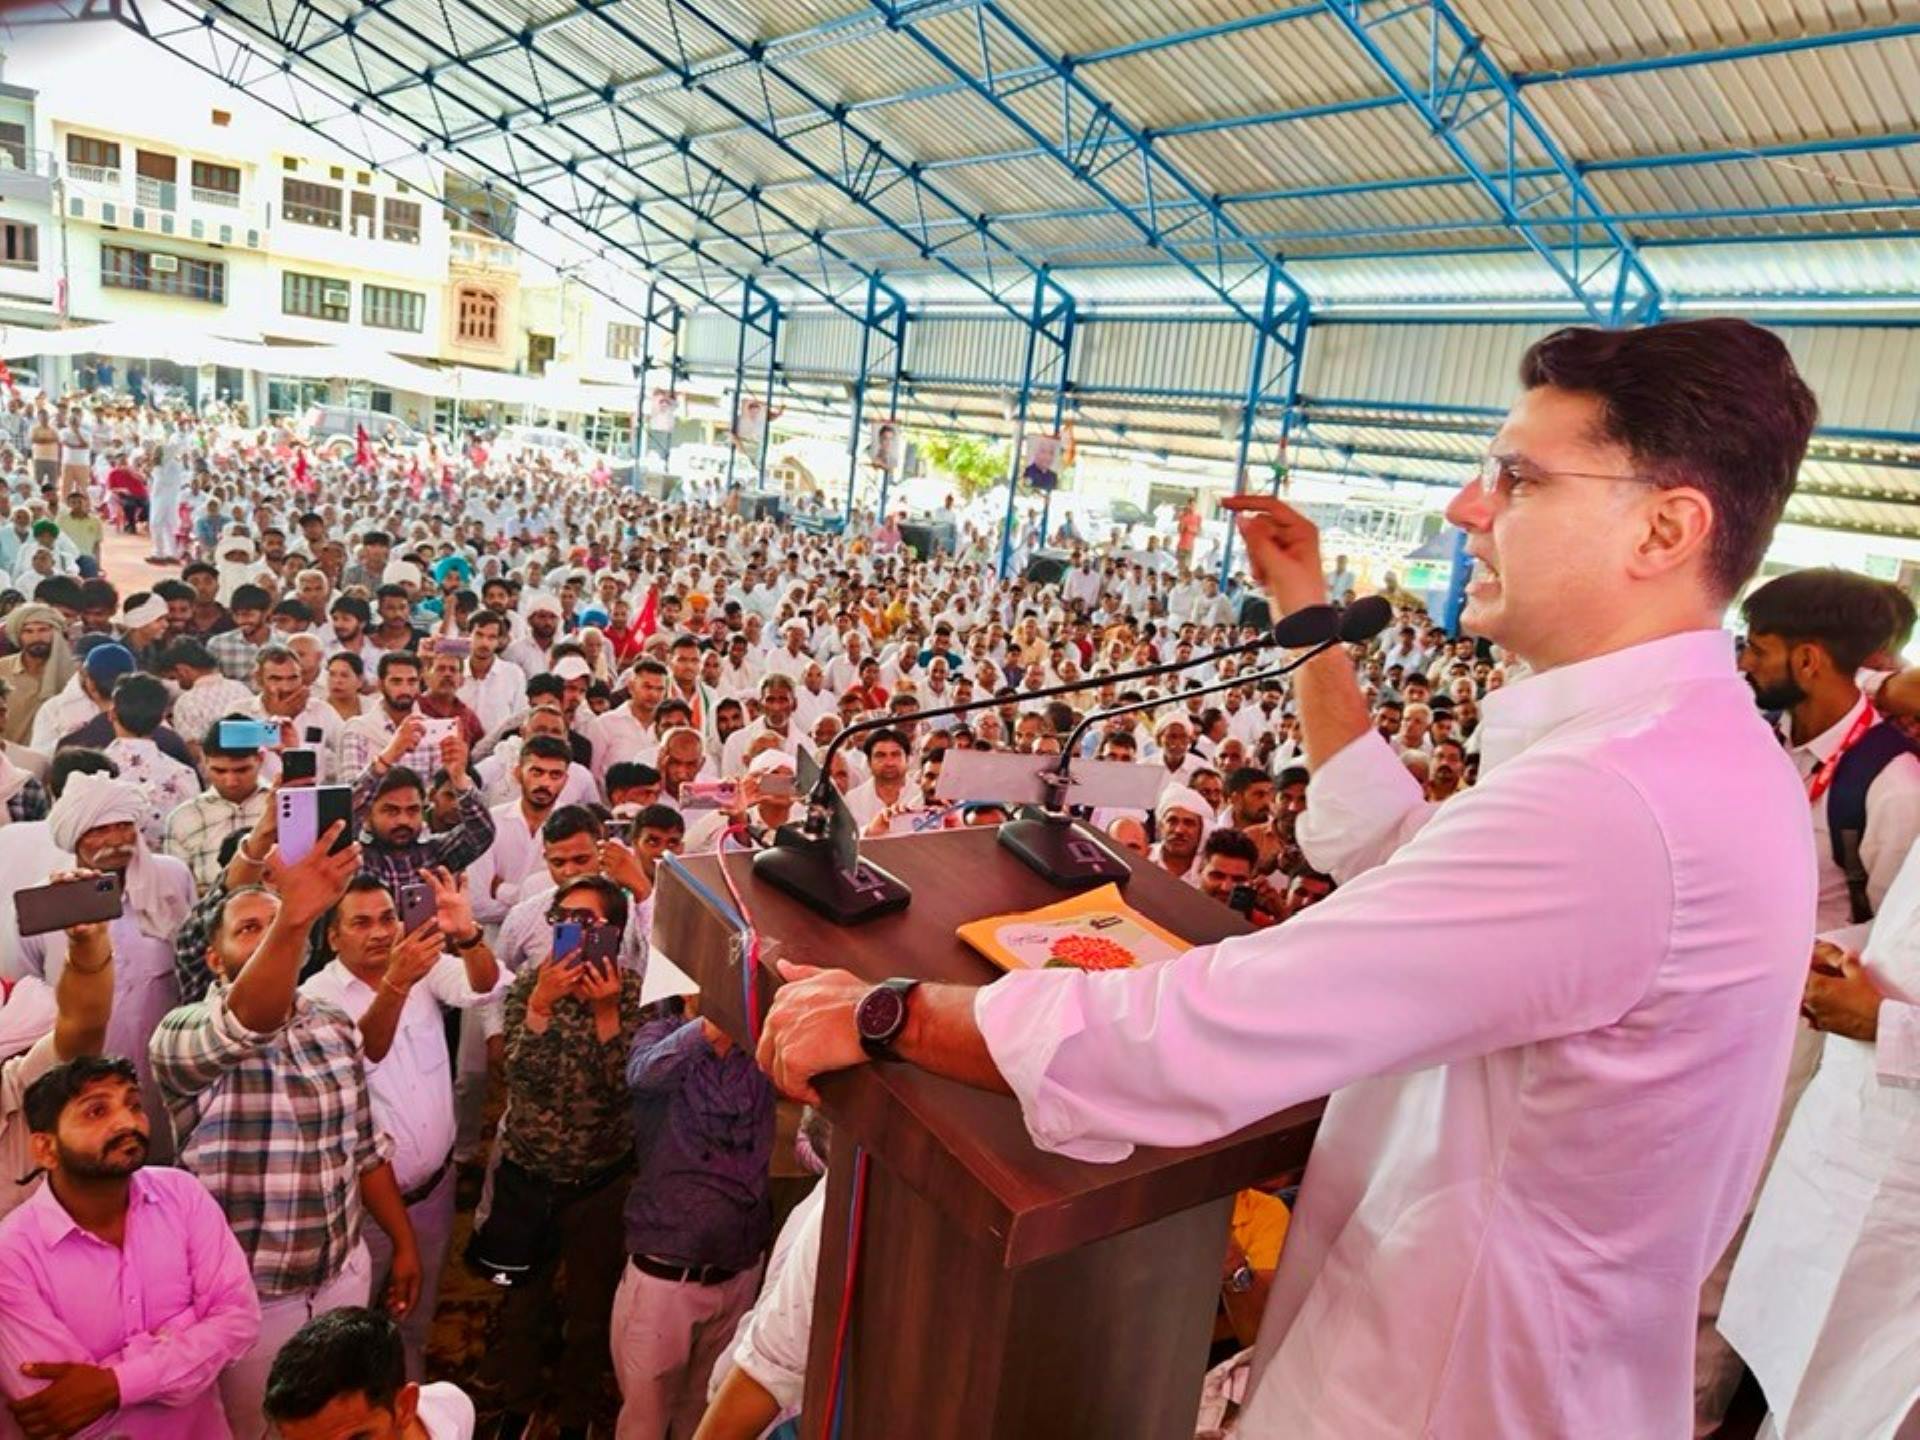 Congress Party's Internal Fighting Exposed at Sachin Pilot's Rally